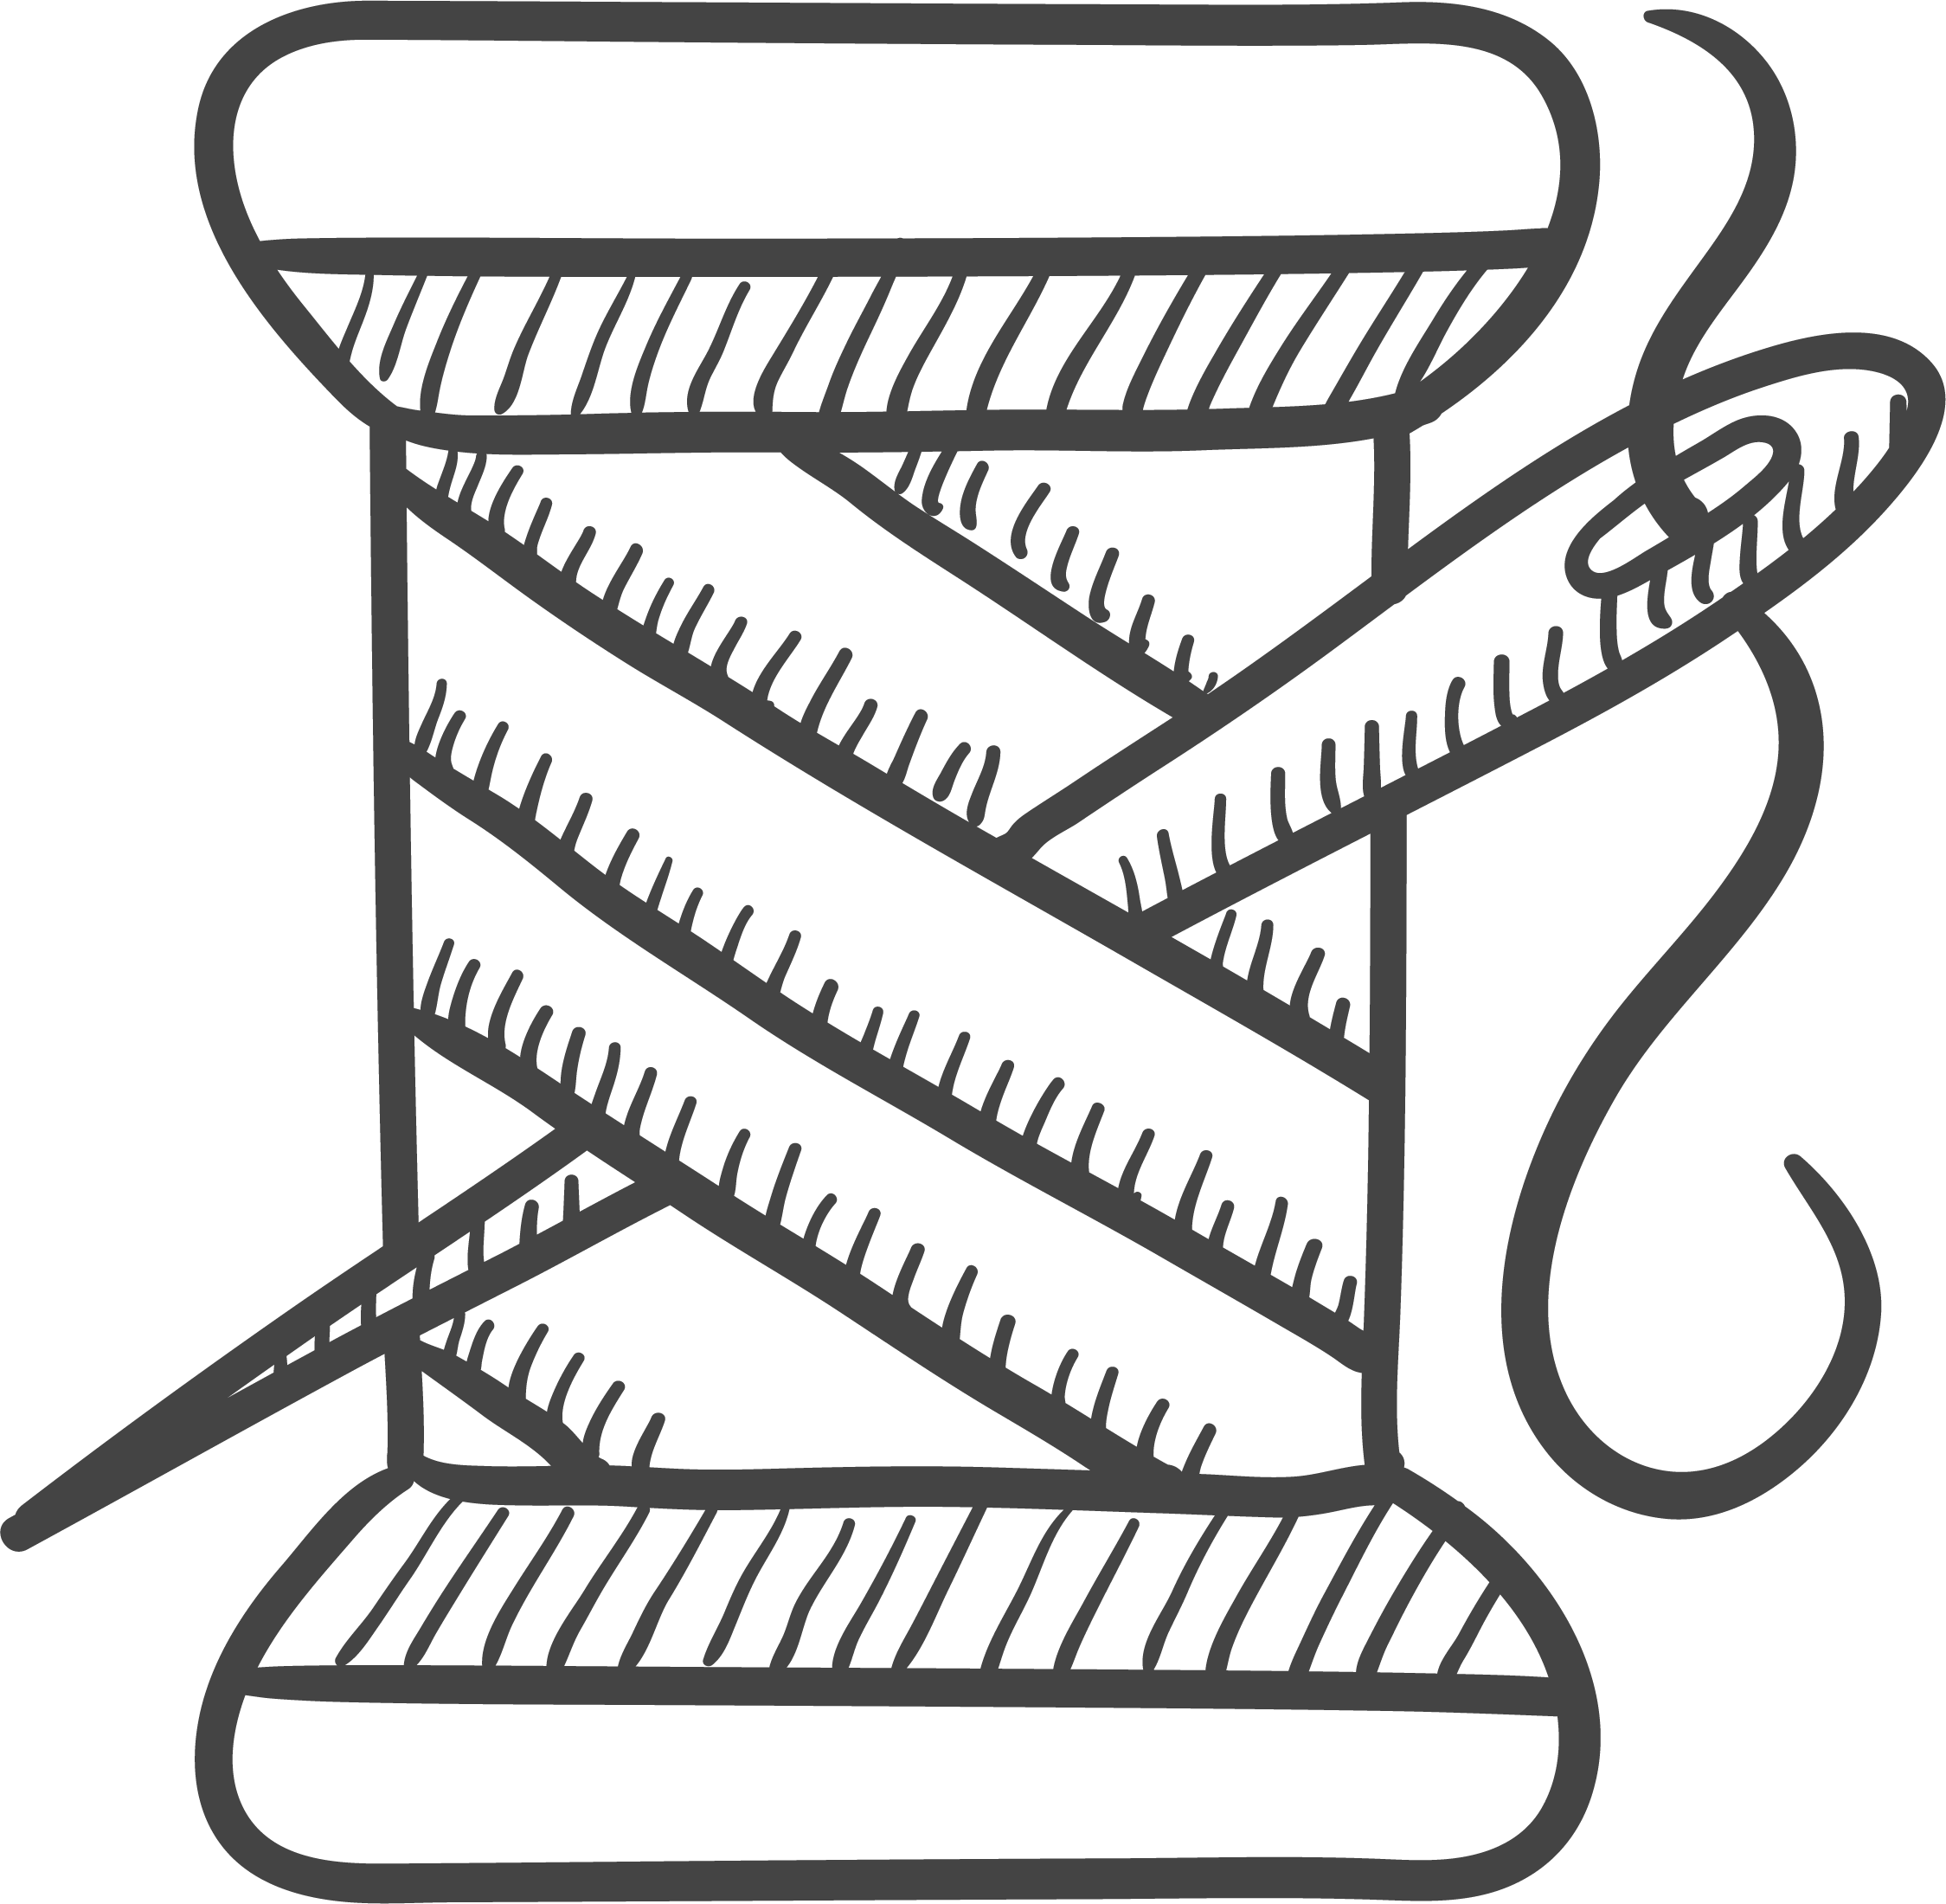 Sketch icon of sewing needle and spool of thread